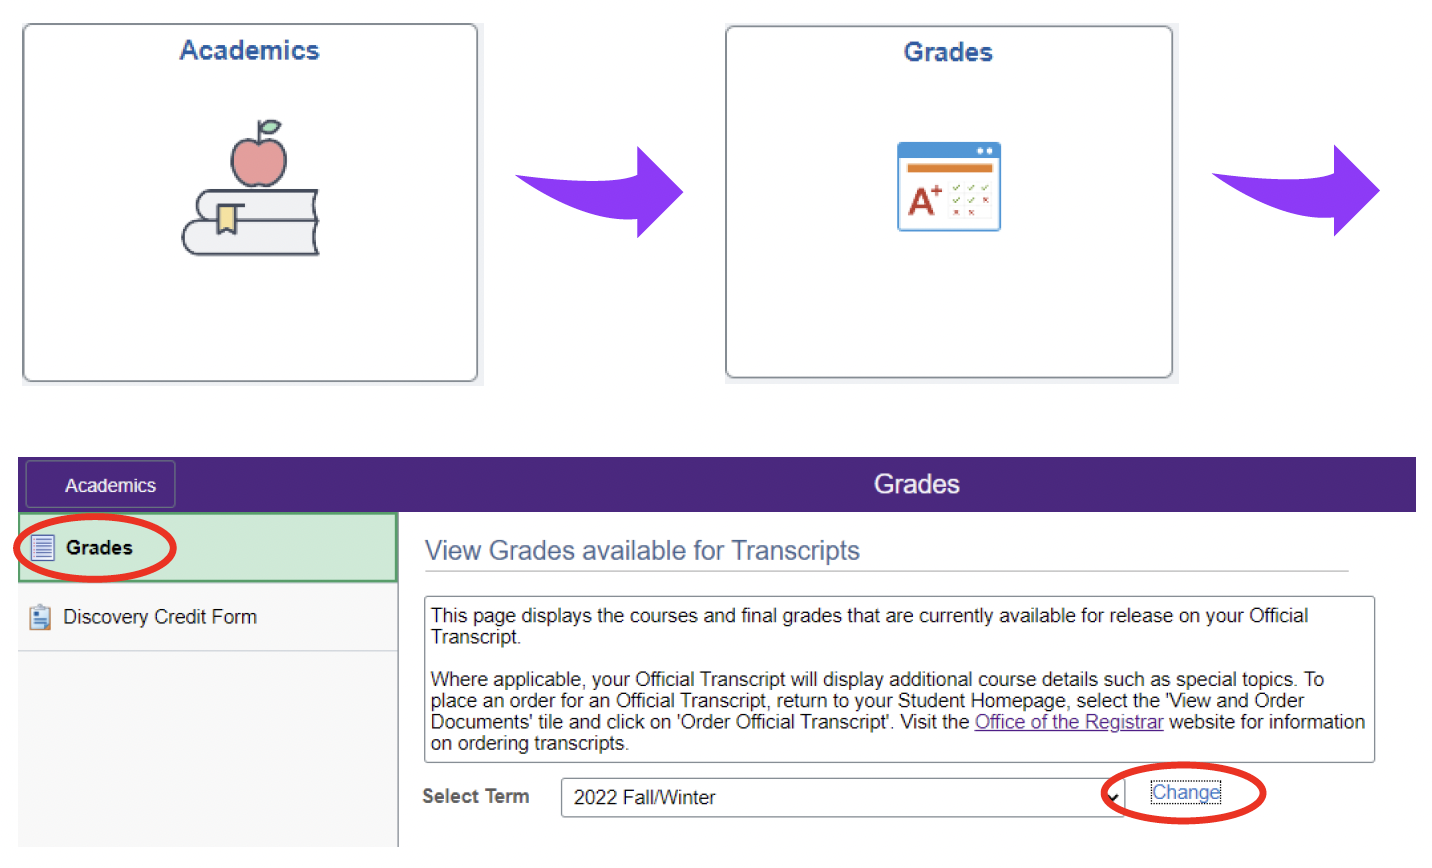 View-my-Grades-available-for-Transcripts.png